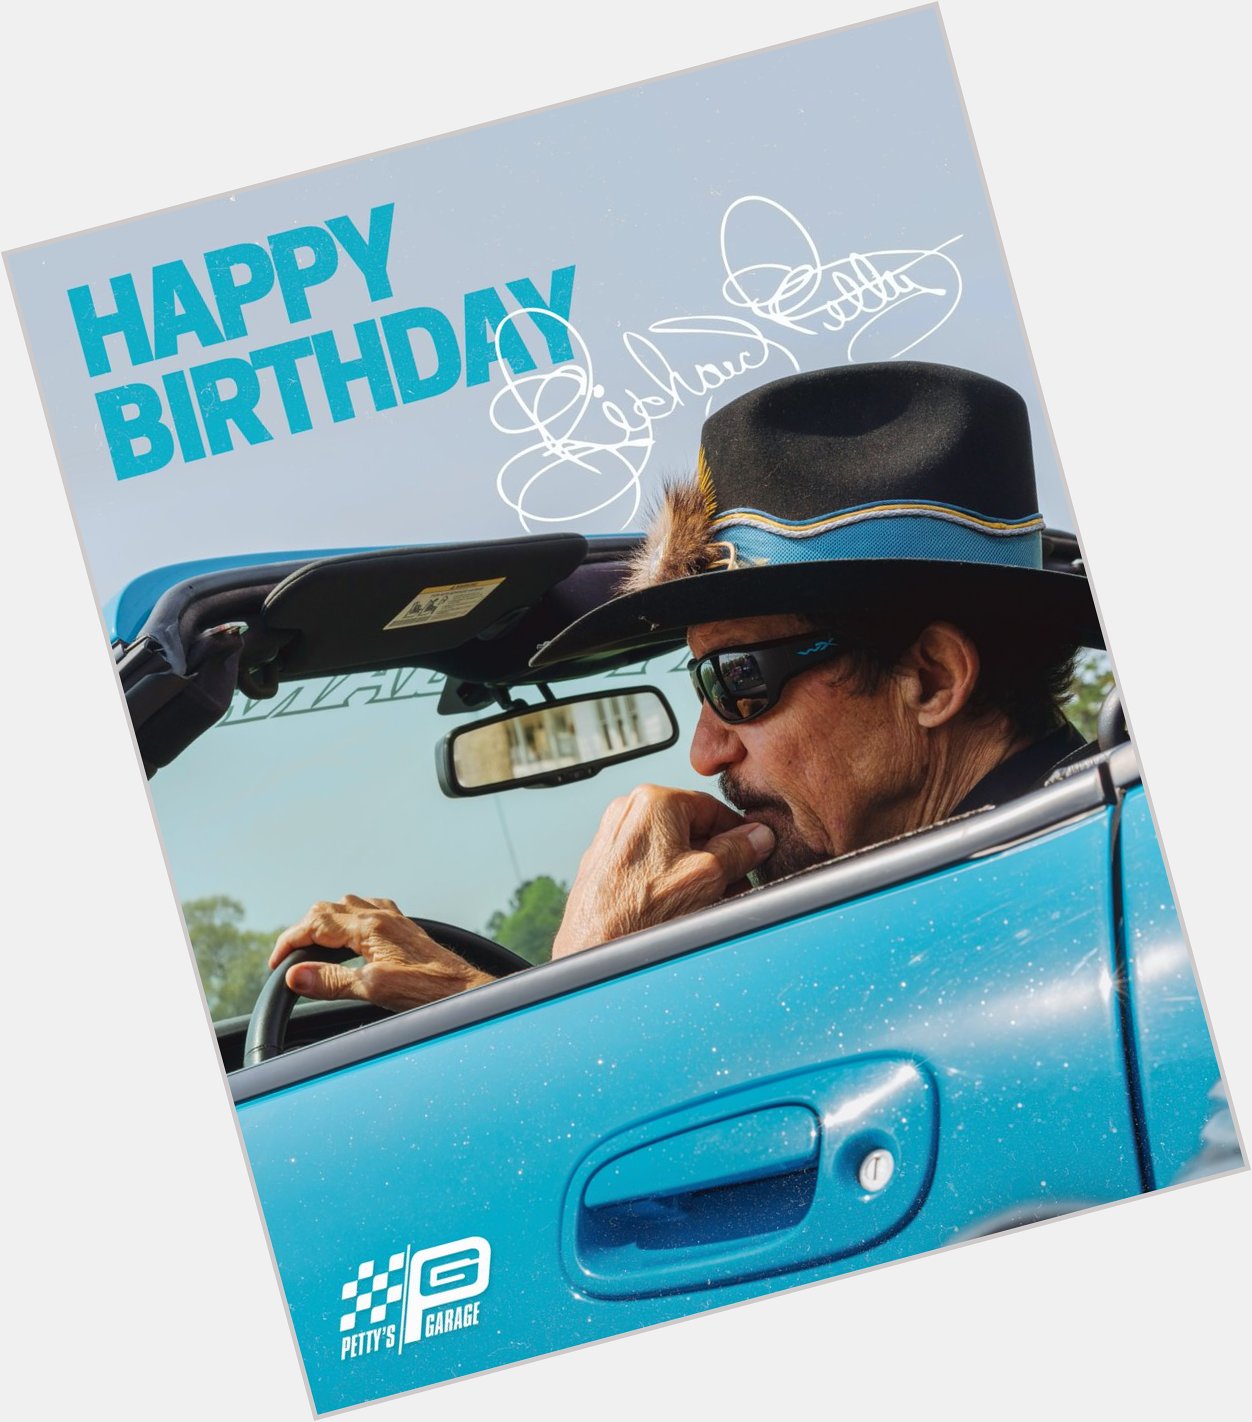 The King celebrates 84 years in the fast lane today!

Wish Richard Petty a very Happy Birthday!  